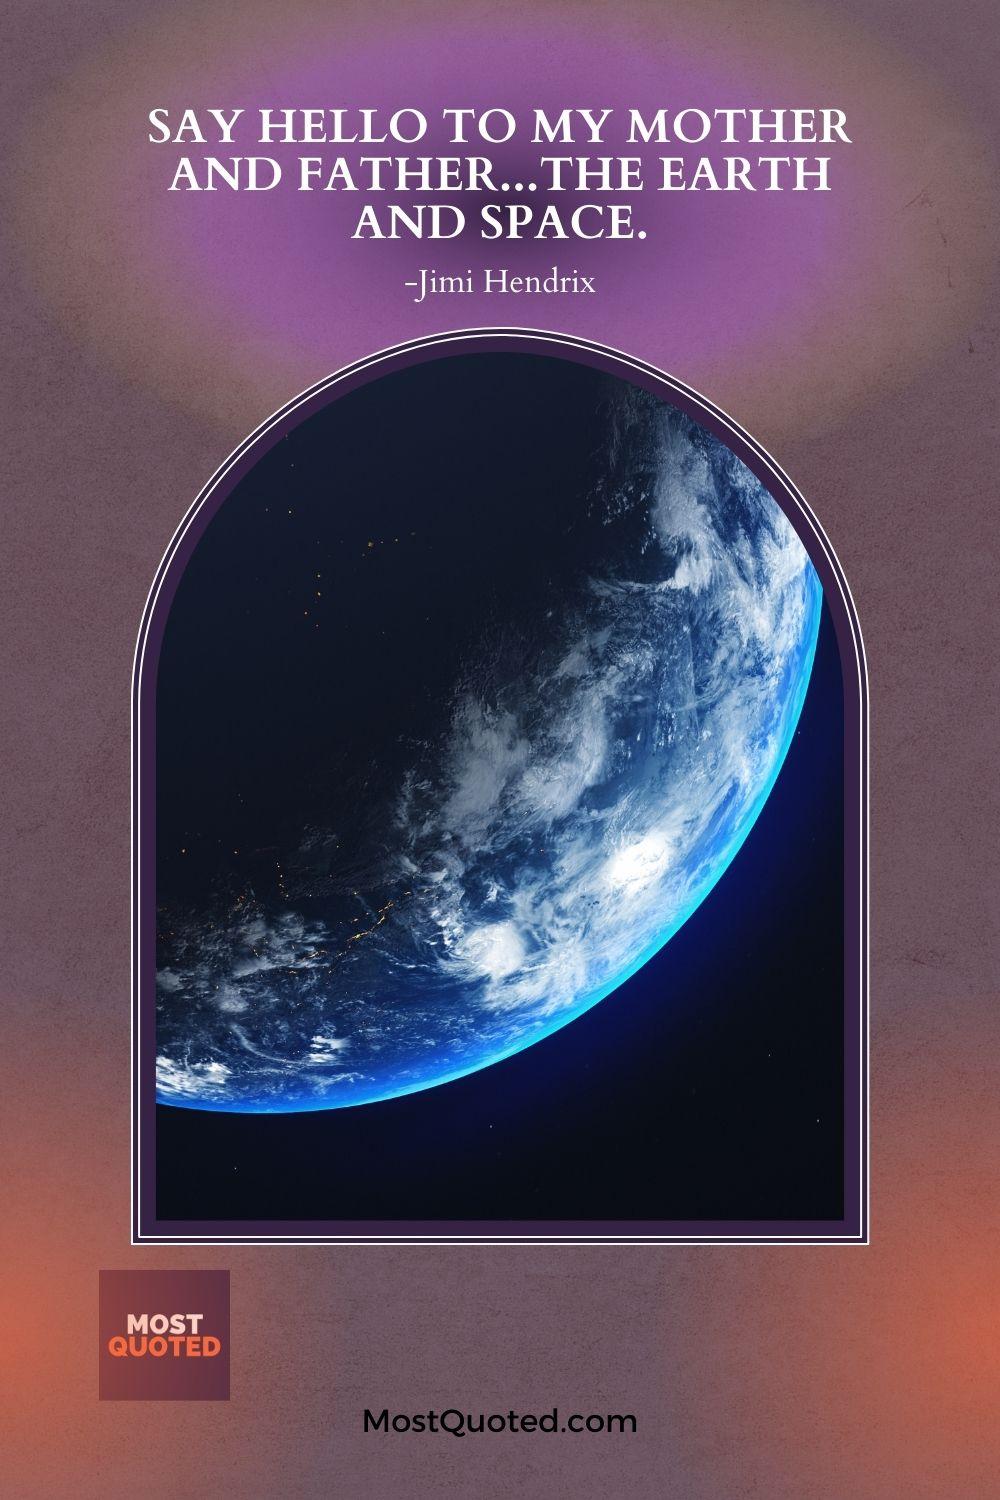 Say hello to my mother and father...the Earth and Space. - Jimi Hendrix